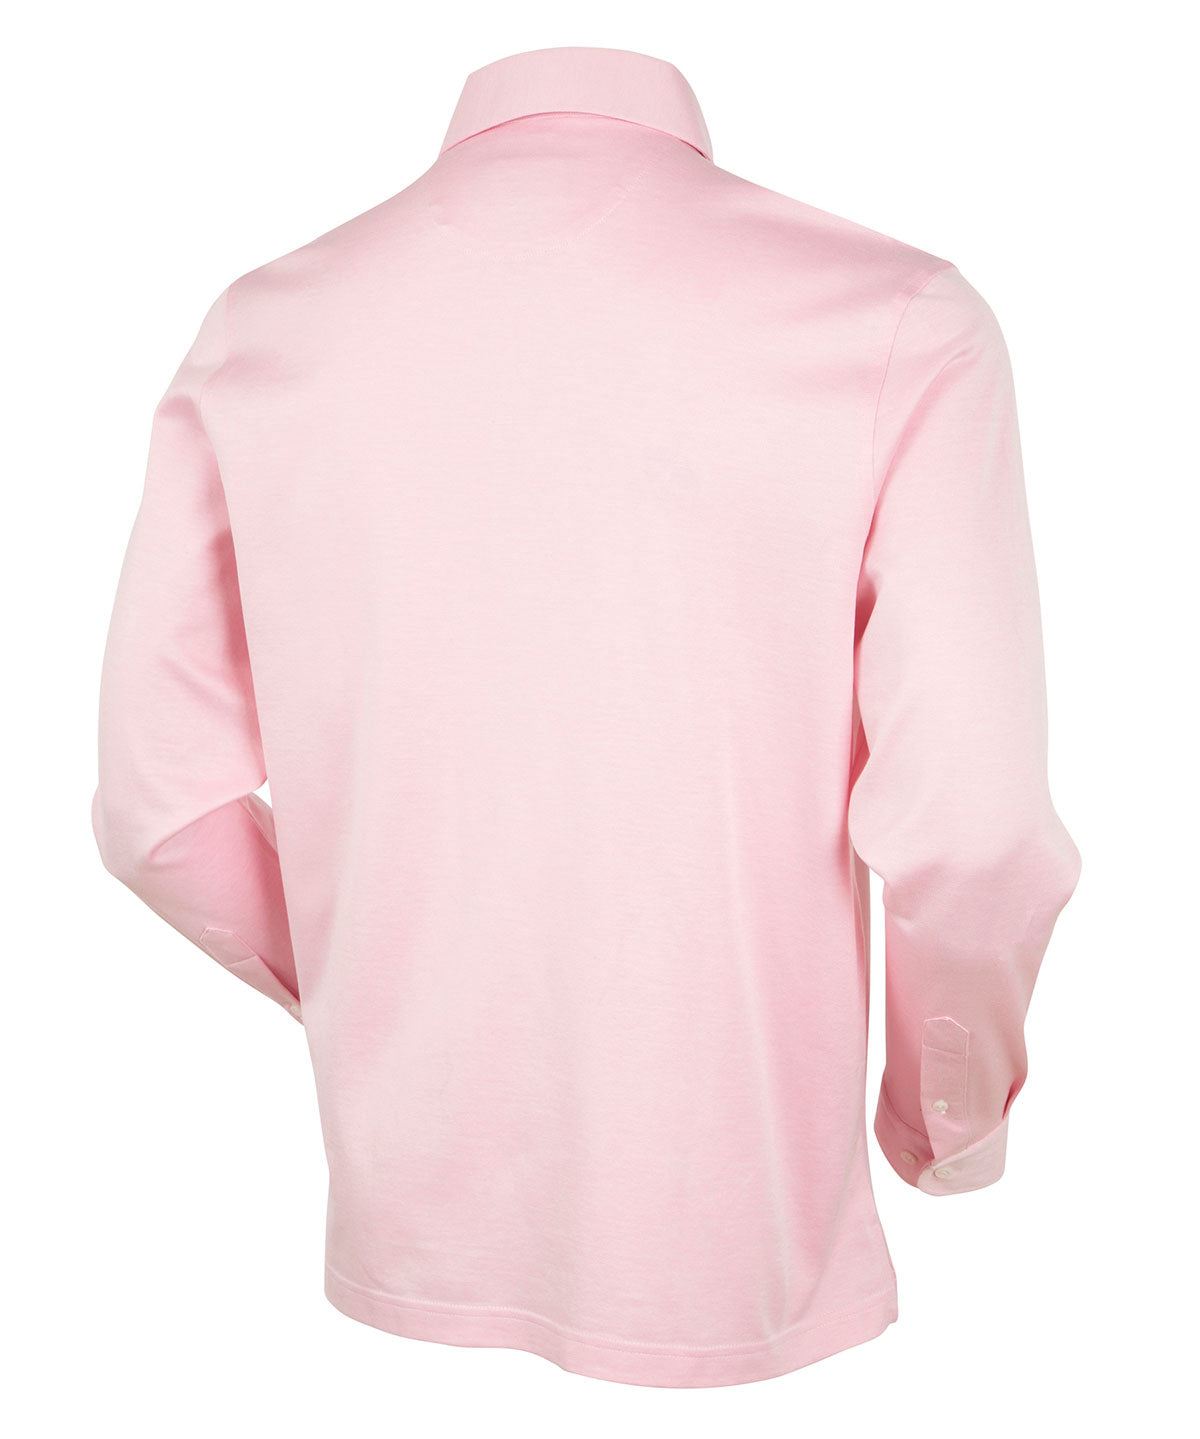 Knotted Collar Long-Sleeved Shirt - Ready to Wear